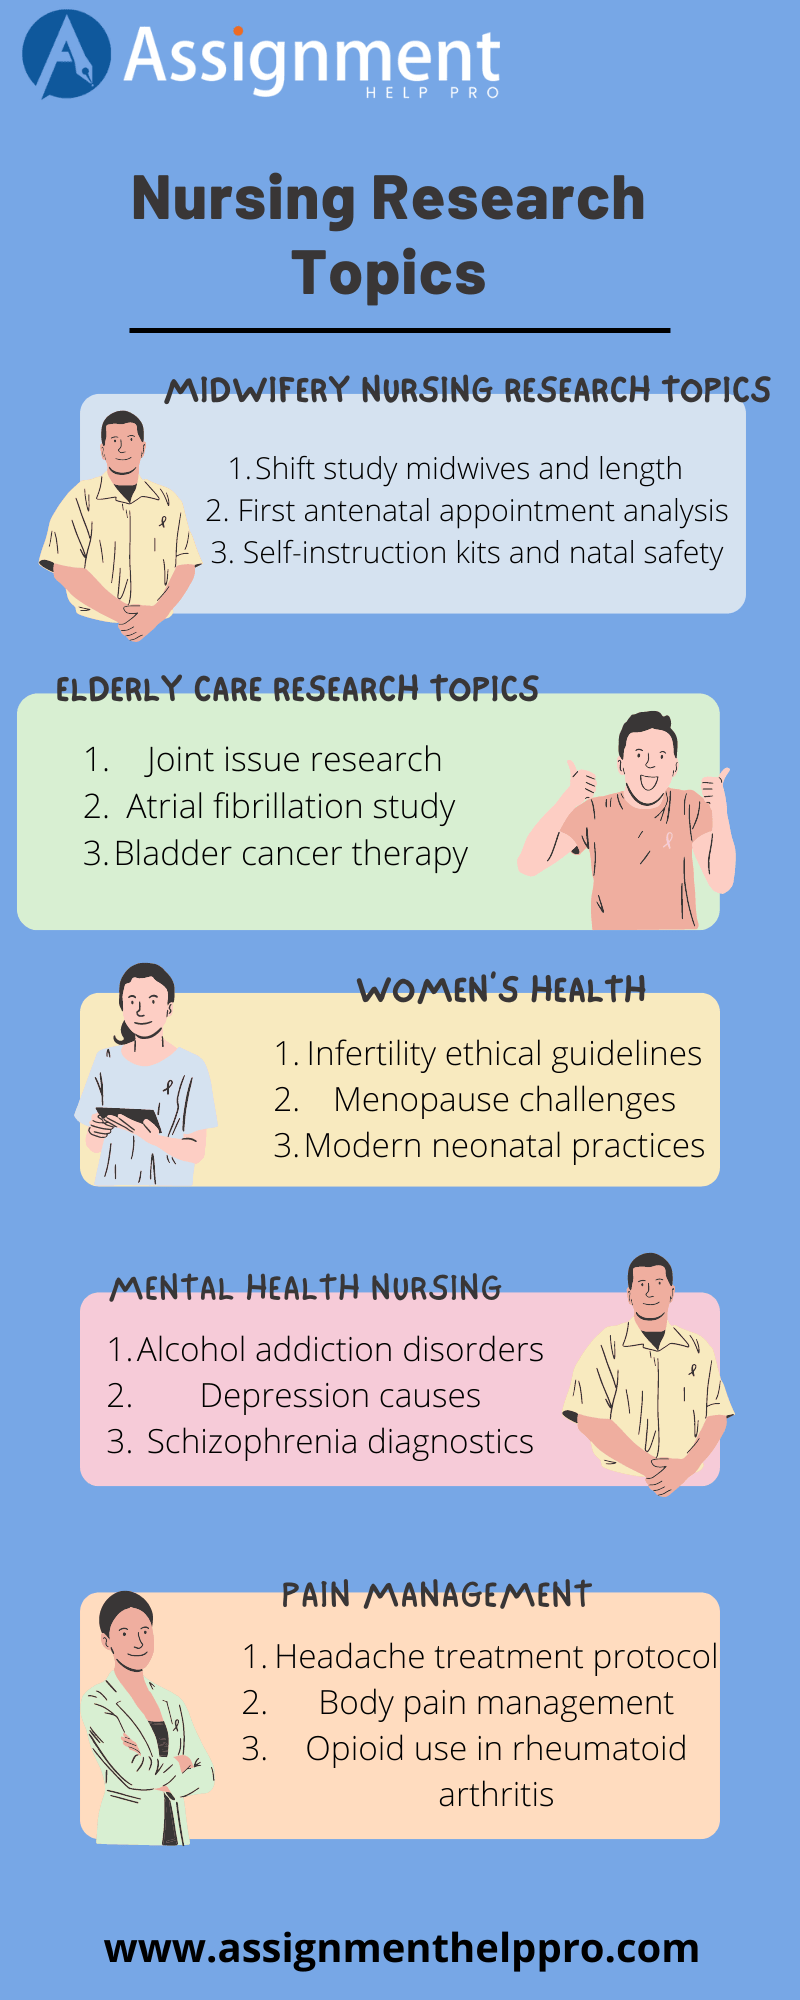 health research topics for students